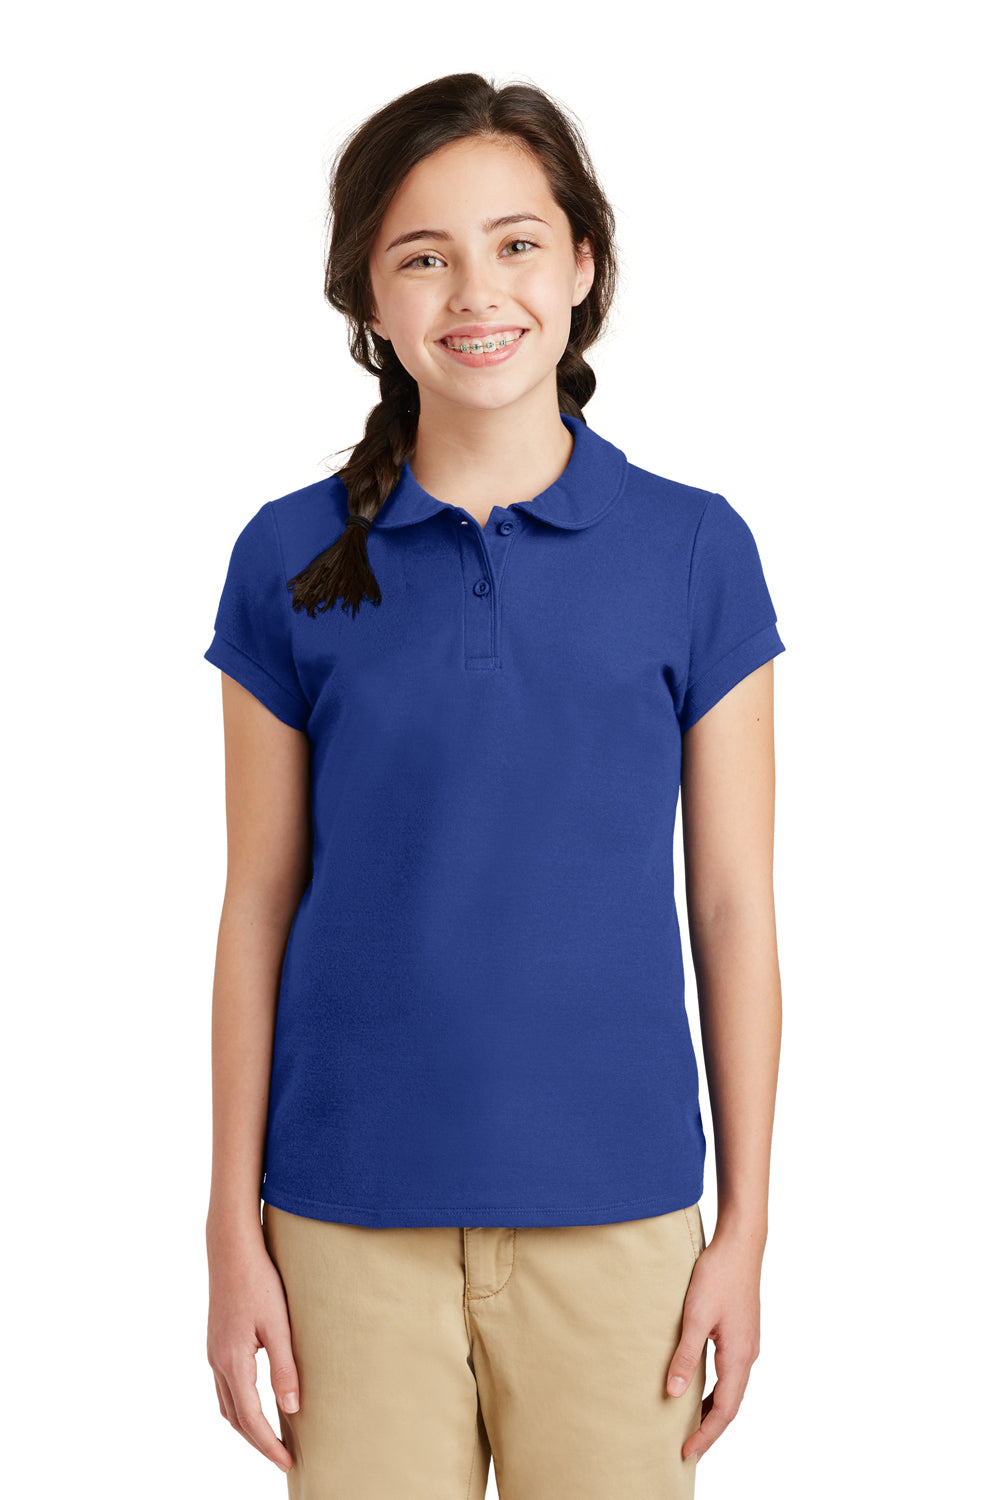 Port Authority YG503 Youth Silk Touch Wrinkle Resistant Short Sleeve Polo Shirt Royal Blue Front